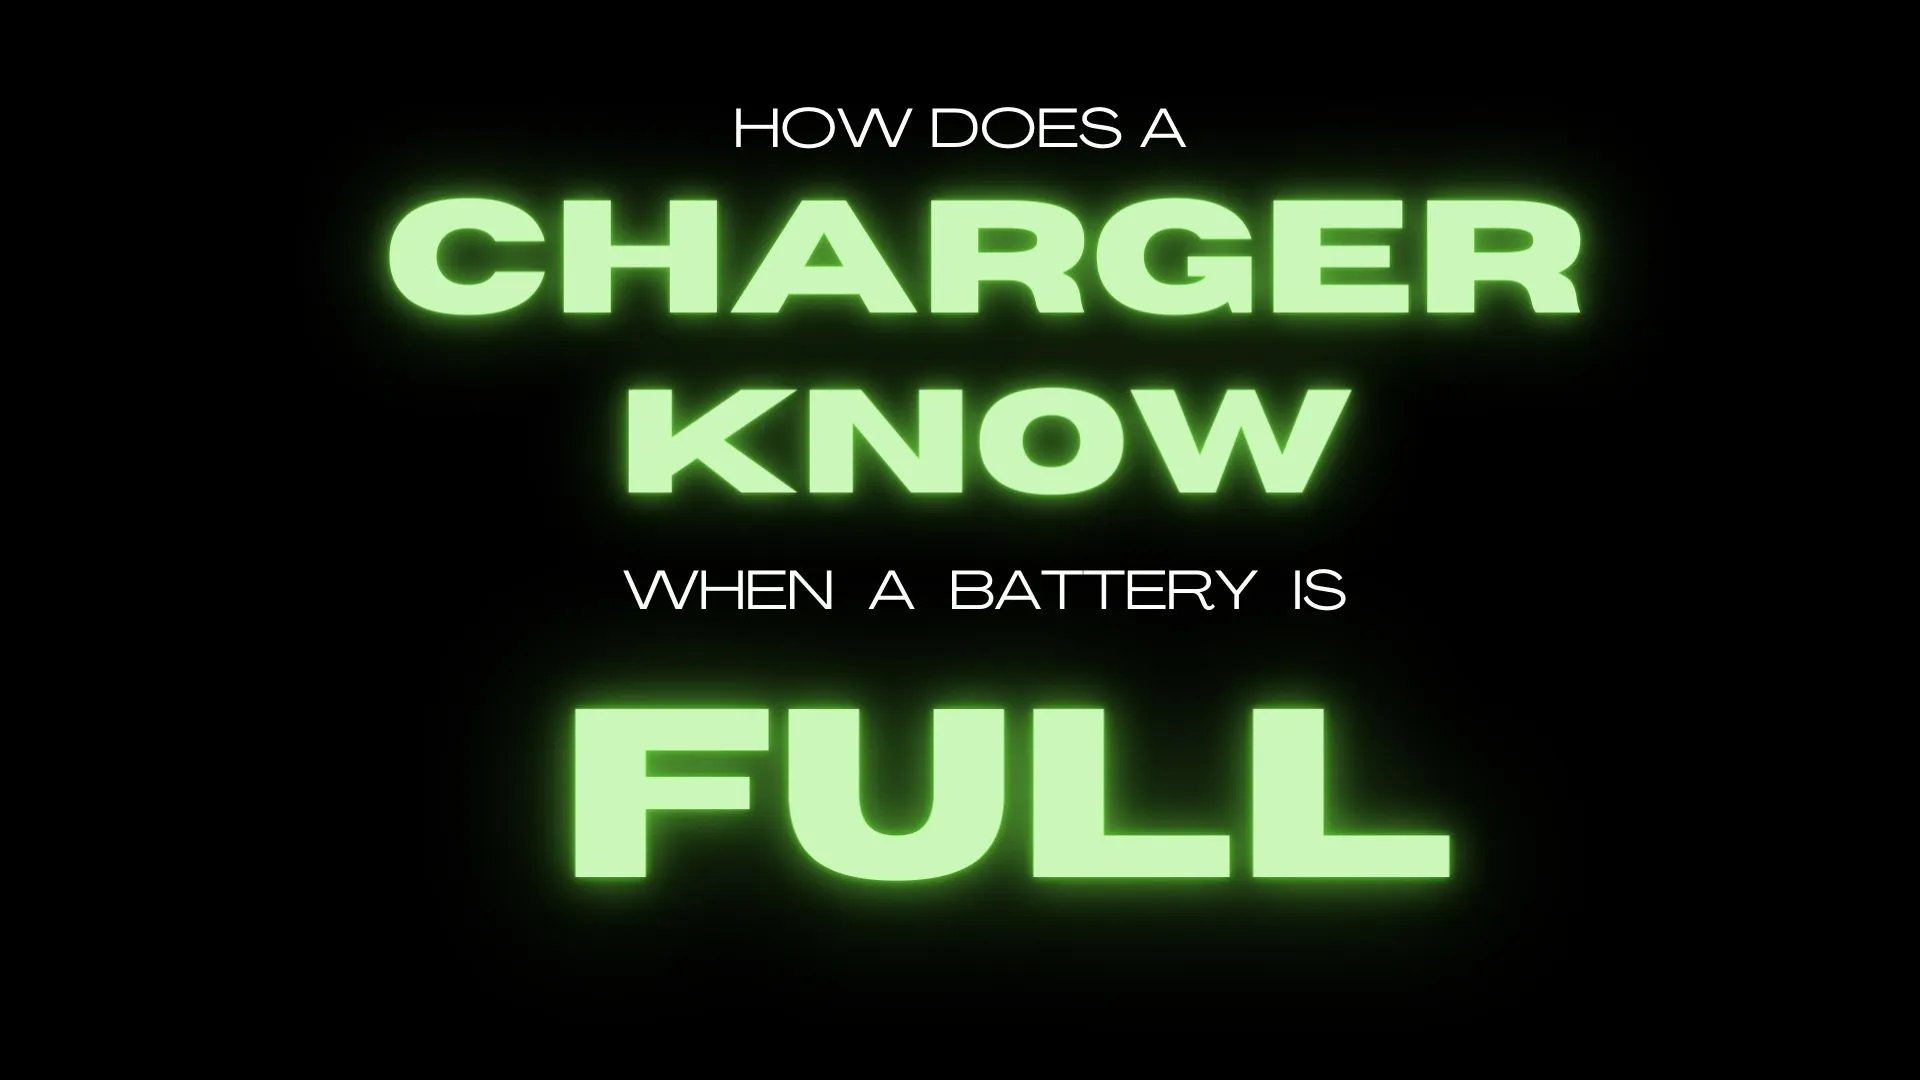 How Does A Charger Know When a Battery Is Full